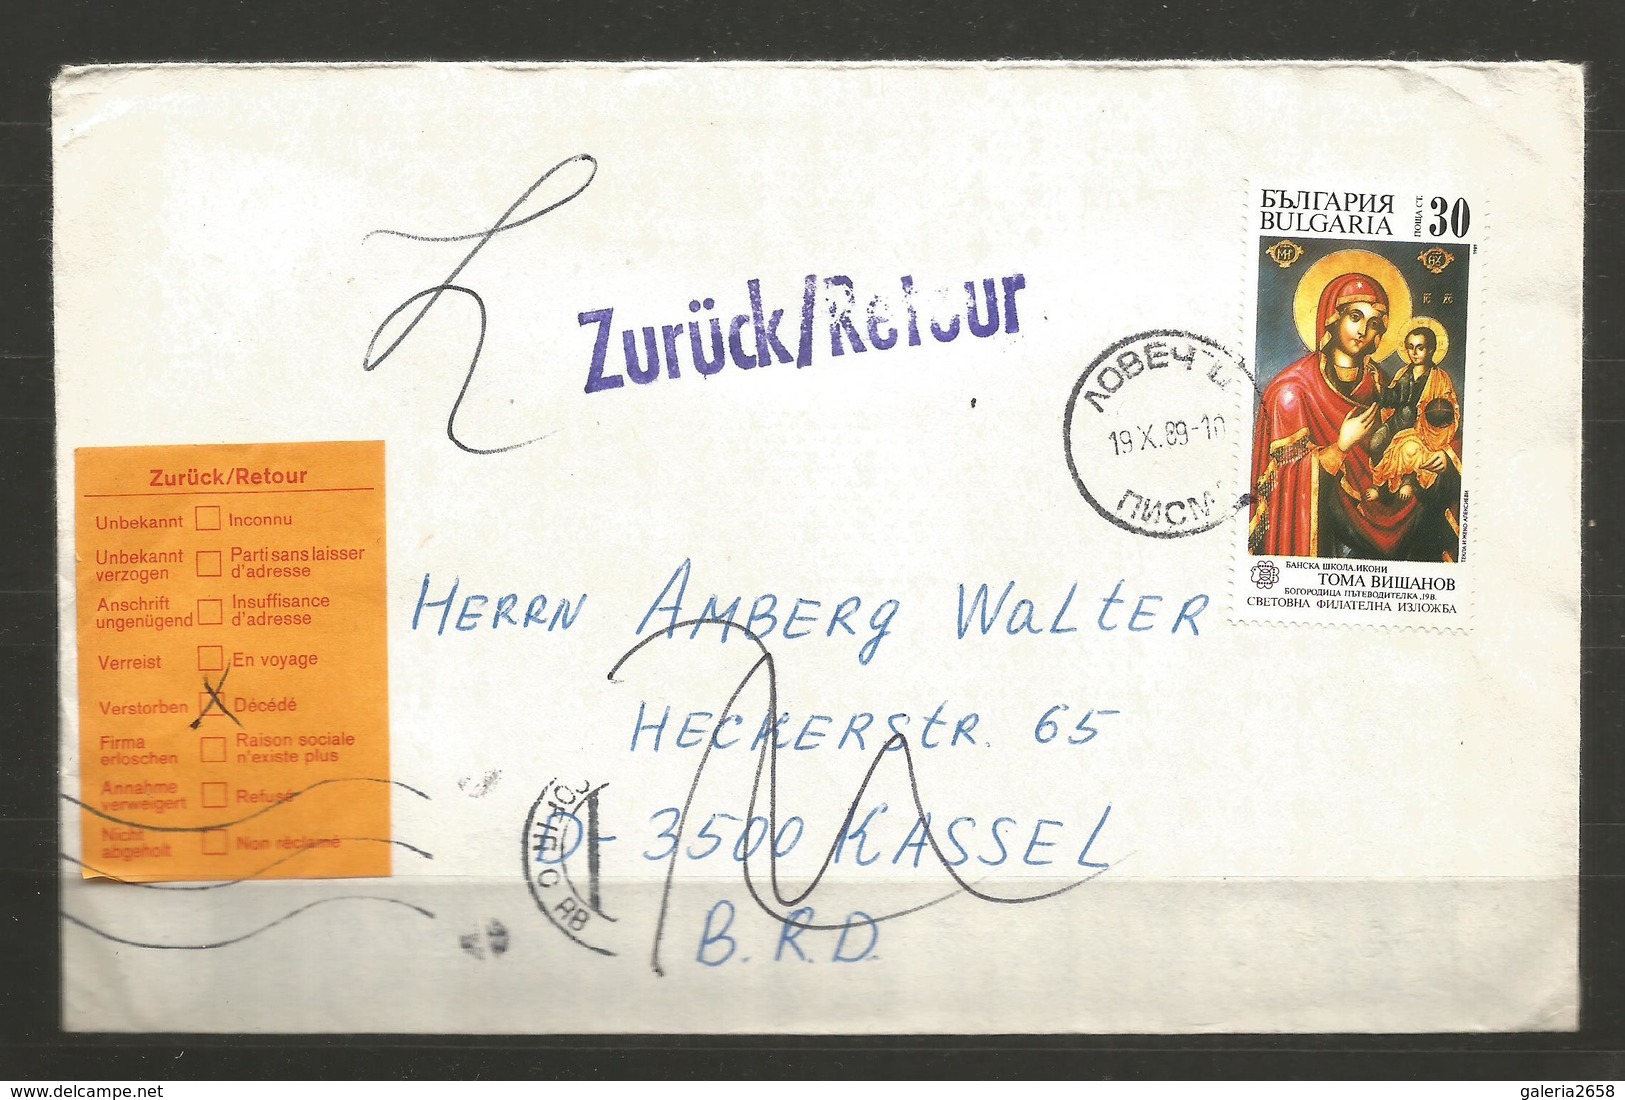 BULGARIA - Interesting  Cover Traveled To GERMANY  And Returned   - D 3994 - Covers & Documents